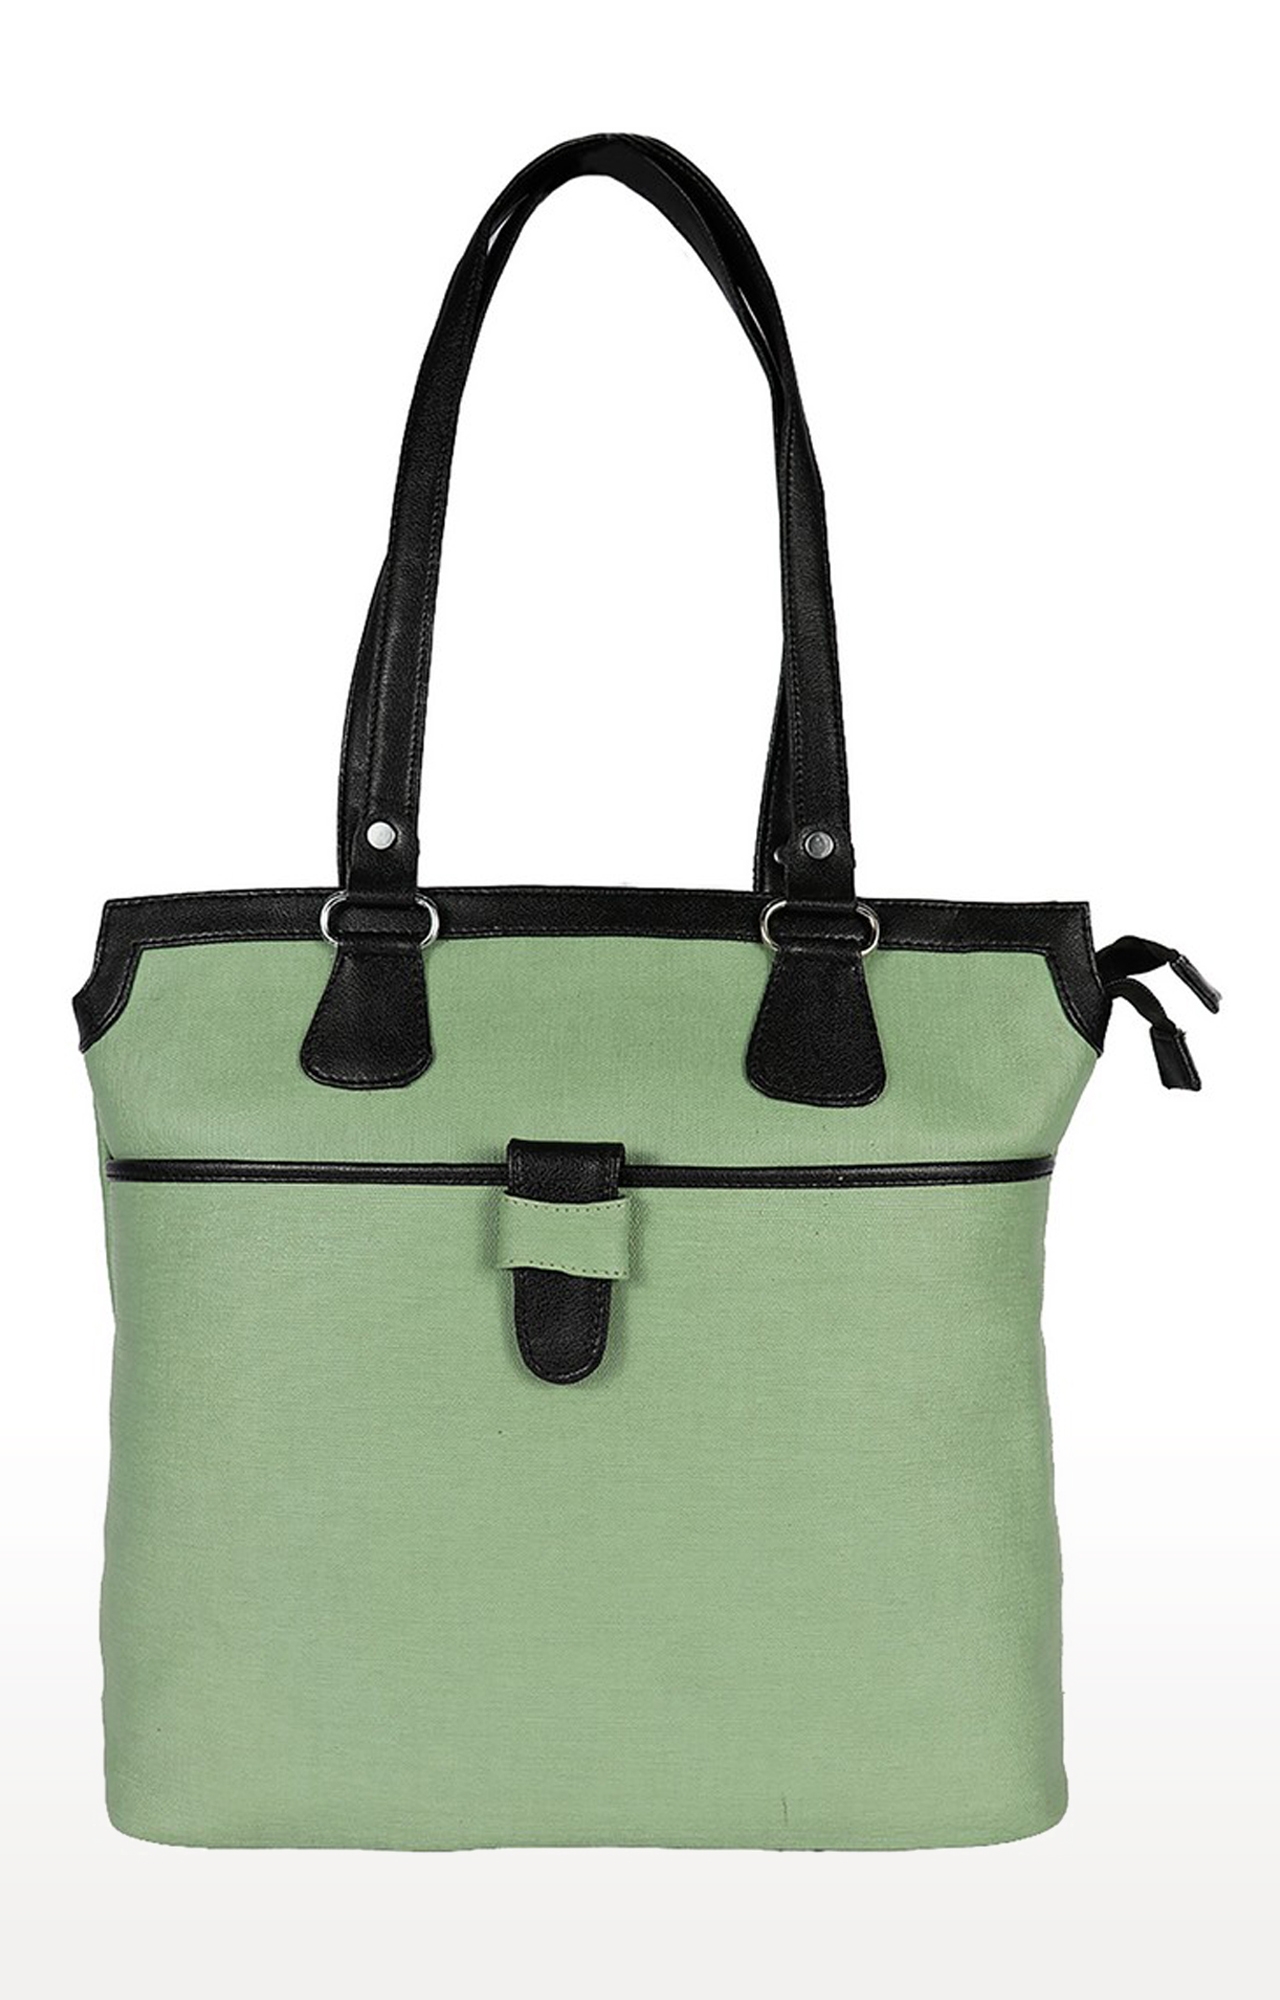 EMM | Lely's Latest Spring Collection Tote Bag For Women For Daily Use In Mint